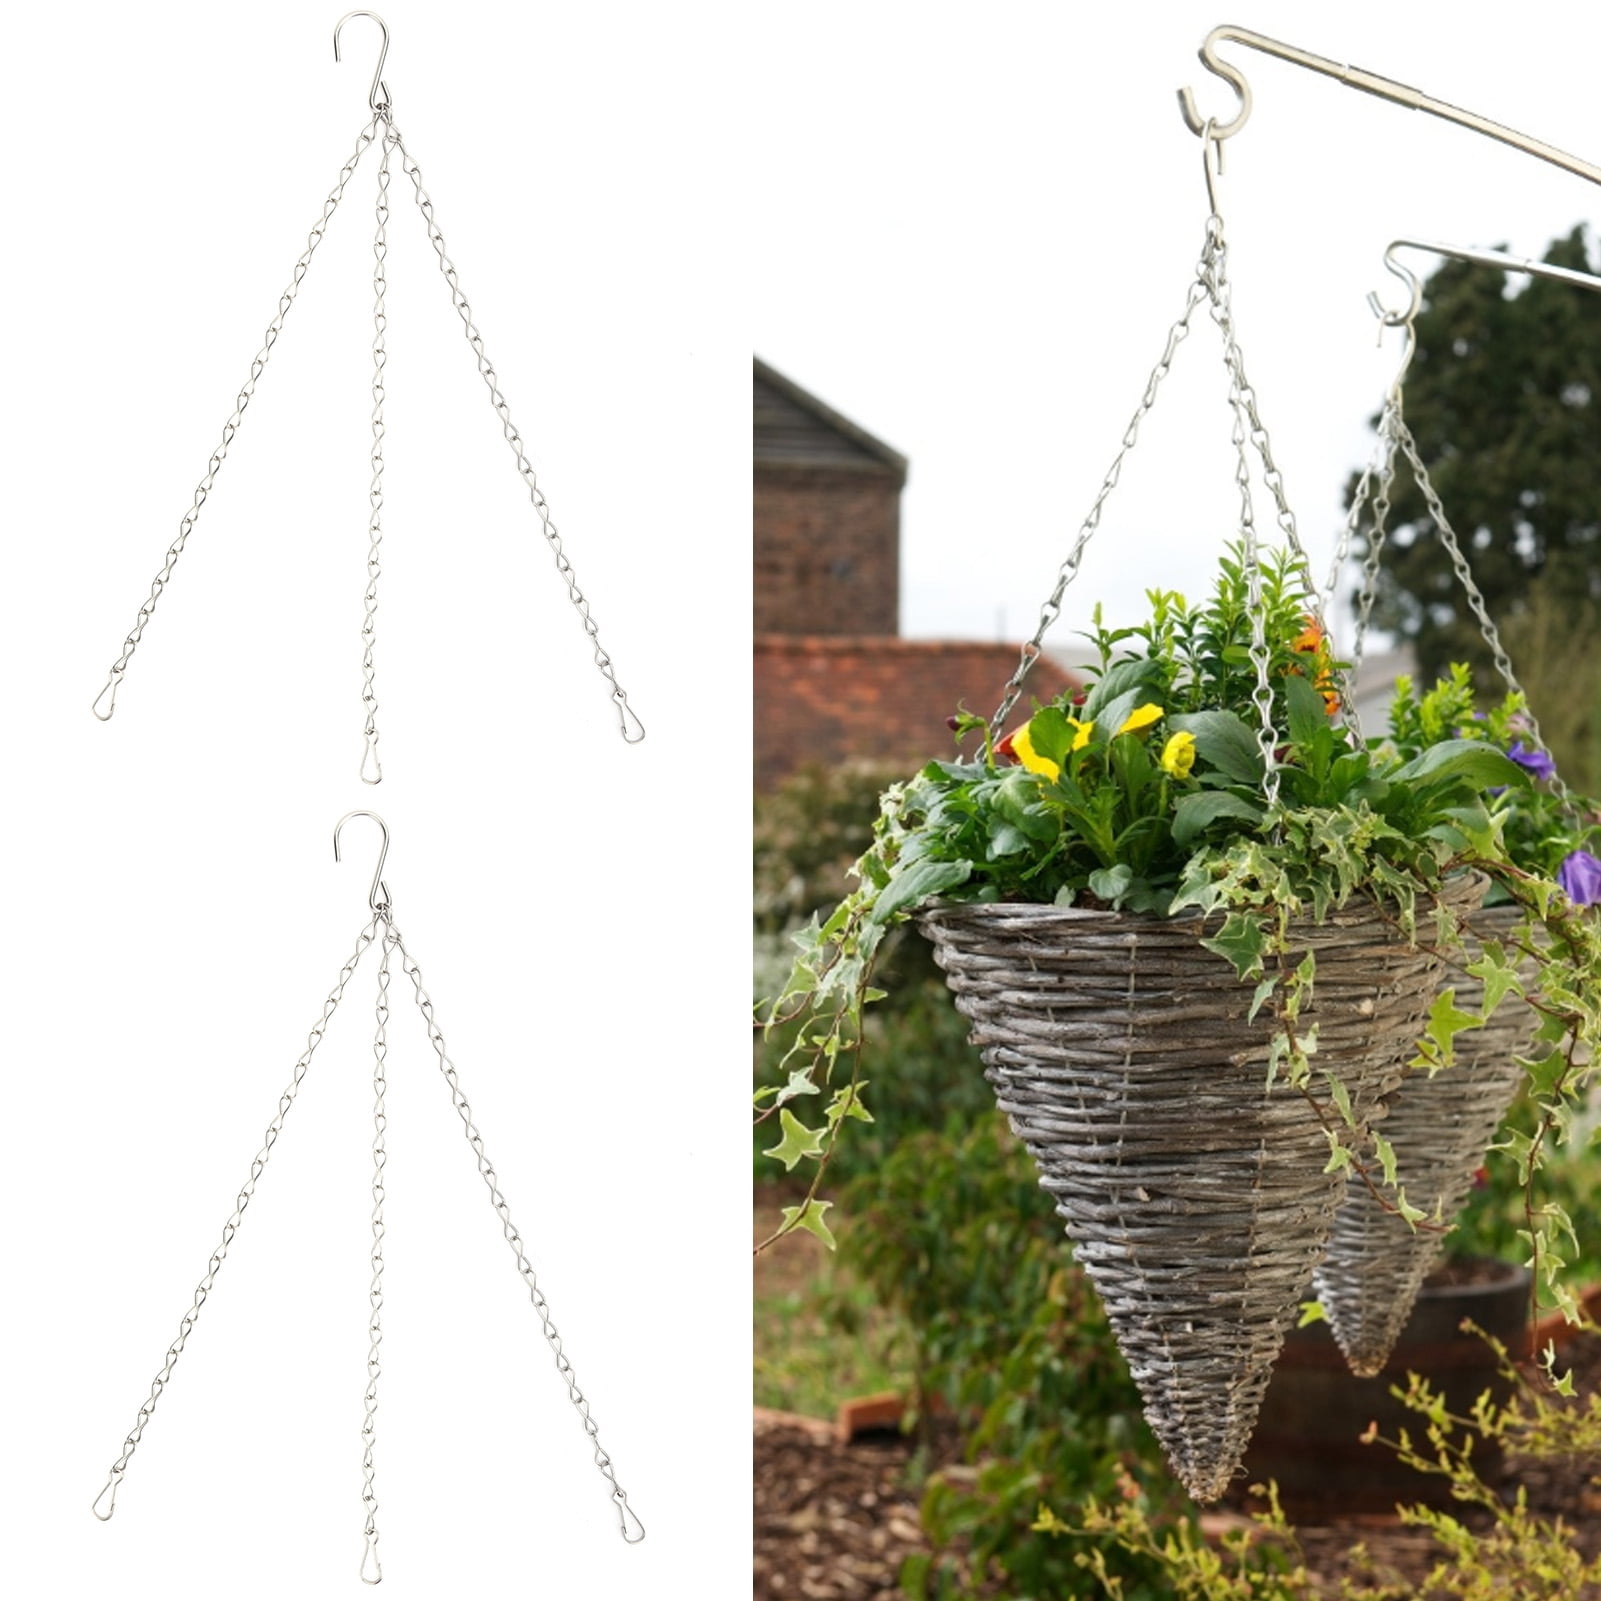  ST4U Hanging Basket Chains 4 Point Heavy Duty Black Metal Chain  Hangers with 4 Clip Hook for Hanging Plants Flowers Baskets Pot 15.75 inch  : Patio, Lawn & Garden